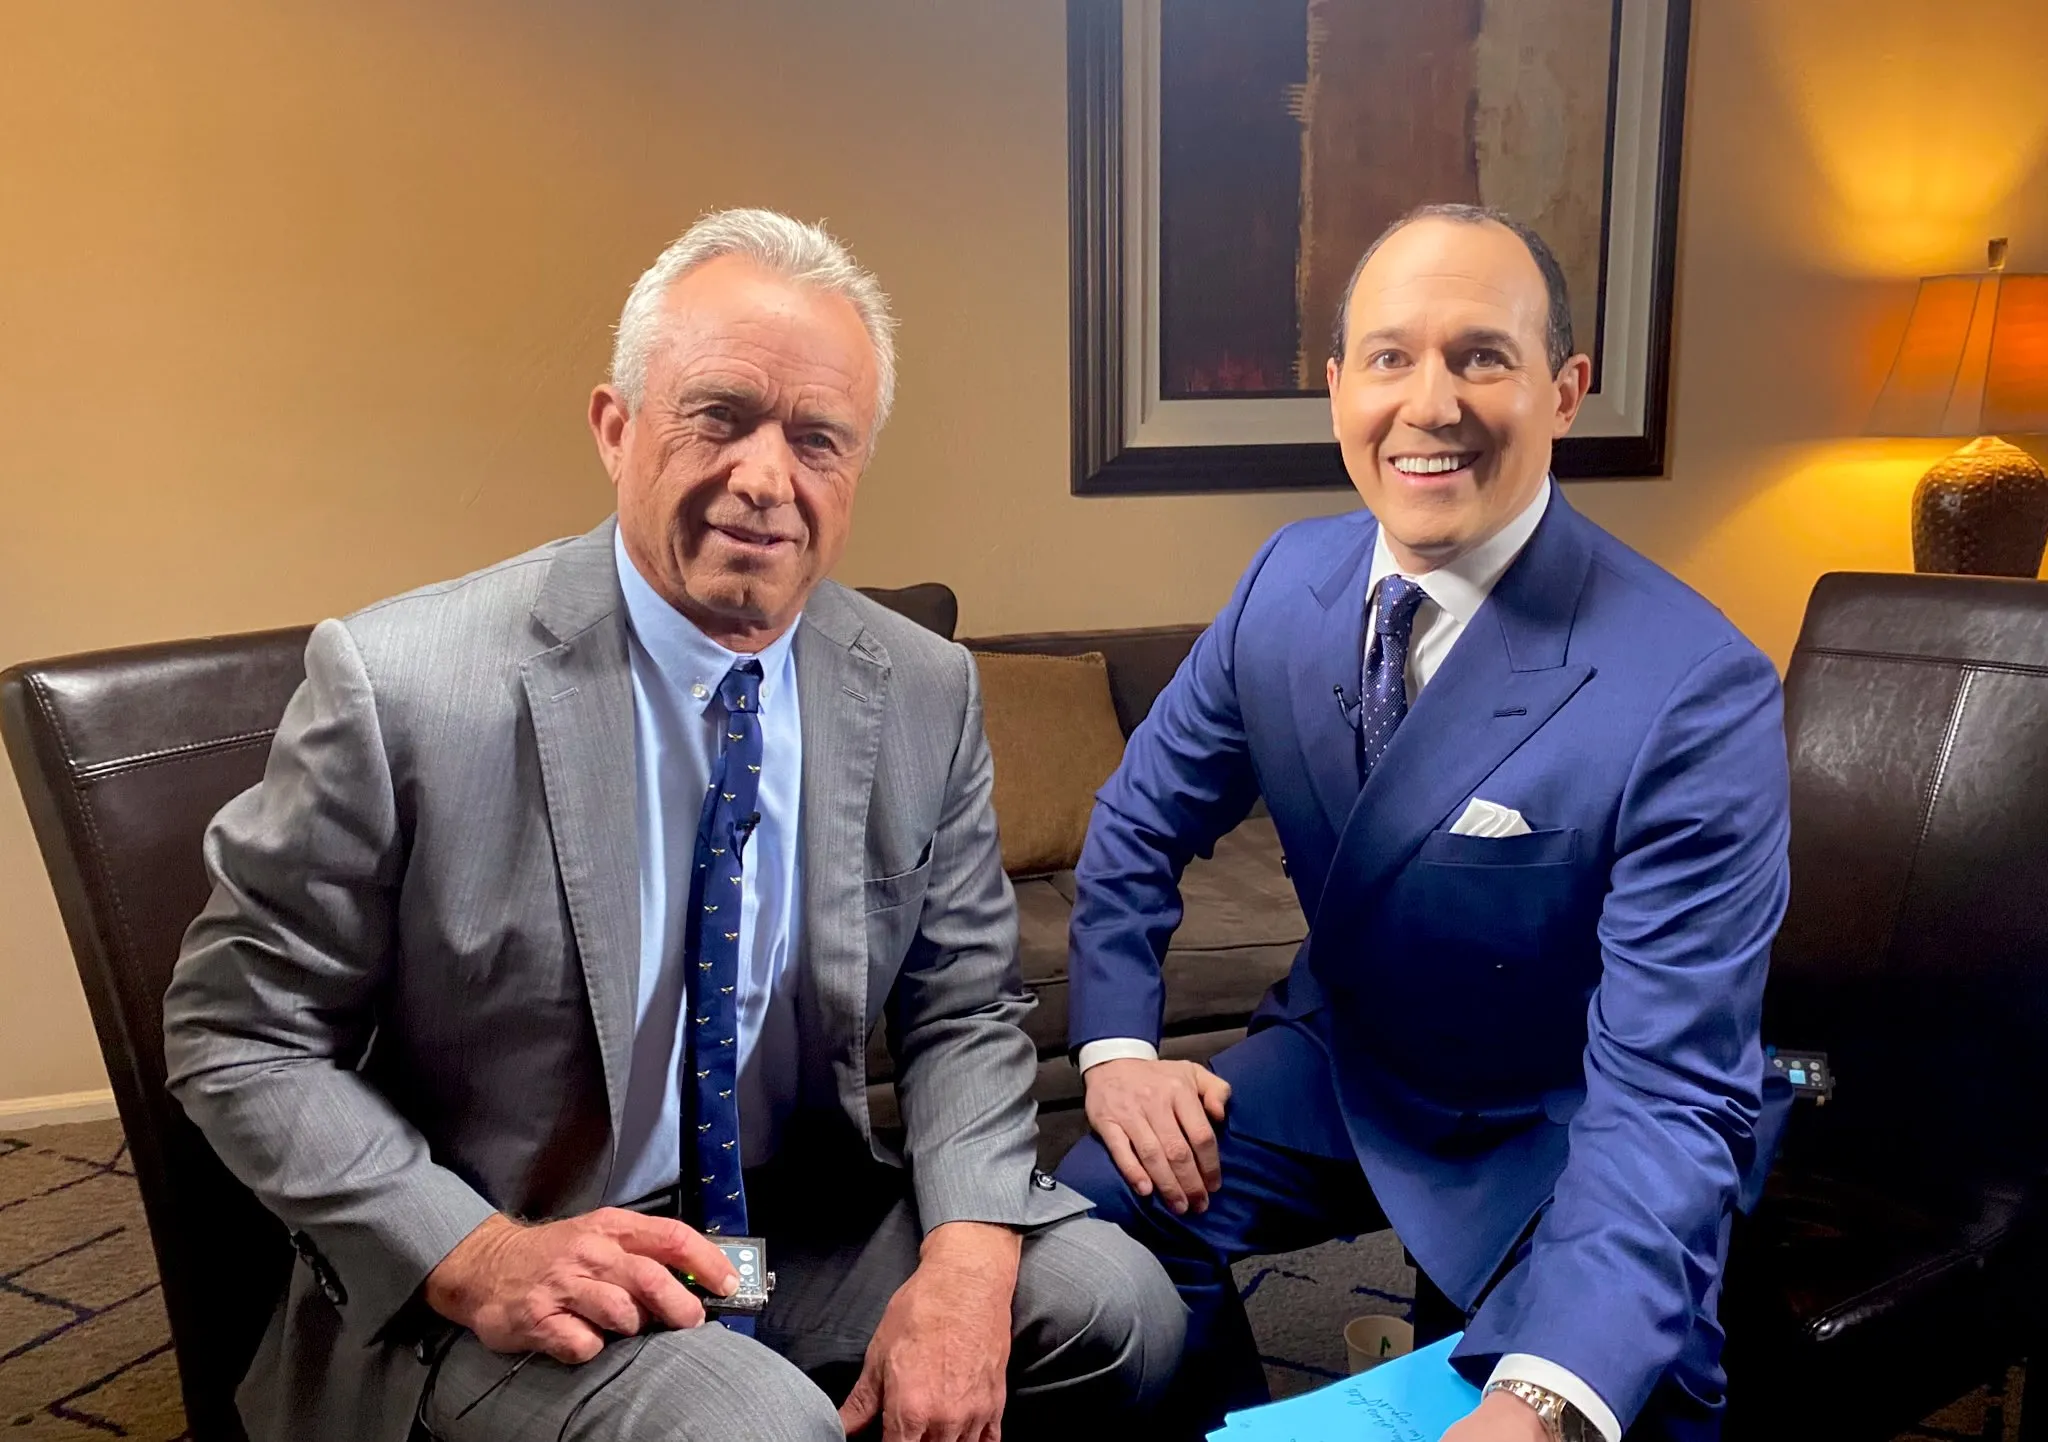 Robert F. Kennedy Jr. opened up to veteran EWTN News anchorman Raymond Arroyo about his family’s strong faith growing up, how his faith helped him overcome drug addiction and how it impacts him in his day-to-day life in the travails of U.S. presidential politics.?w=200&h=150